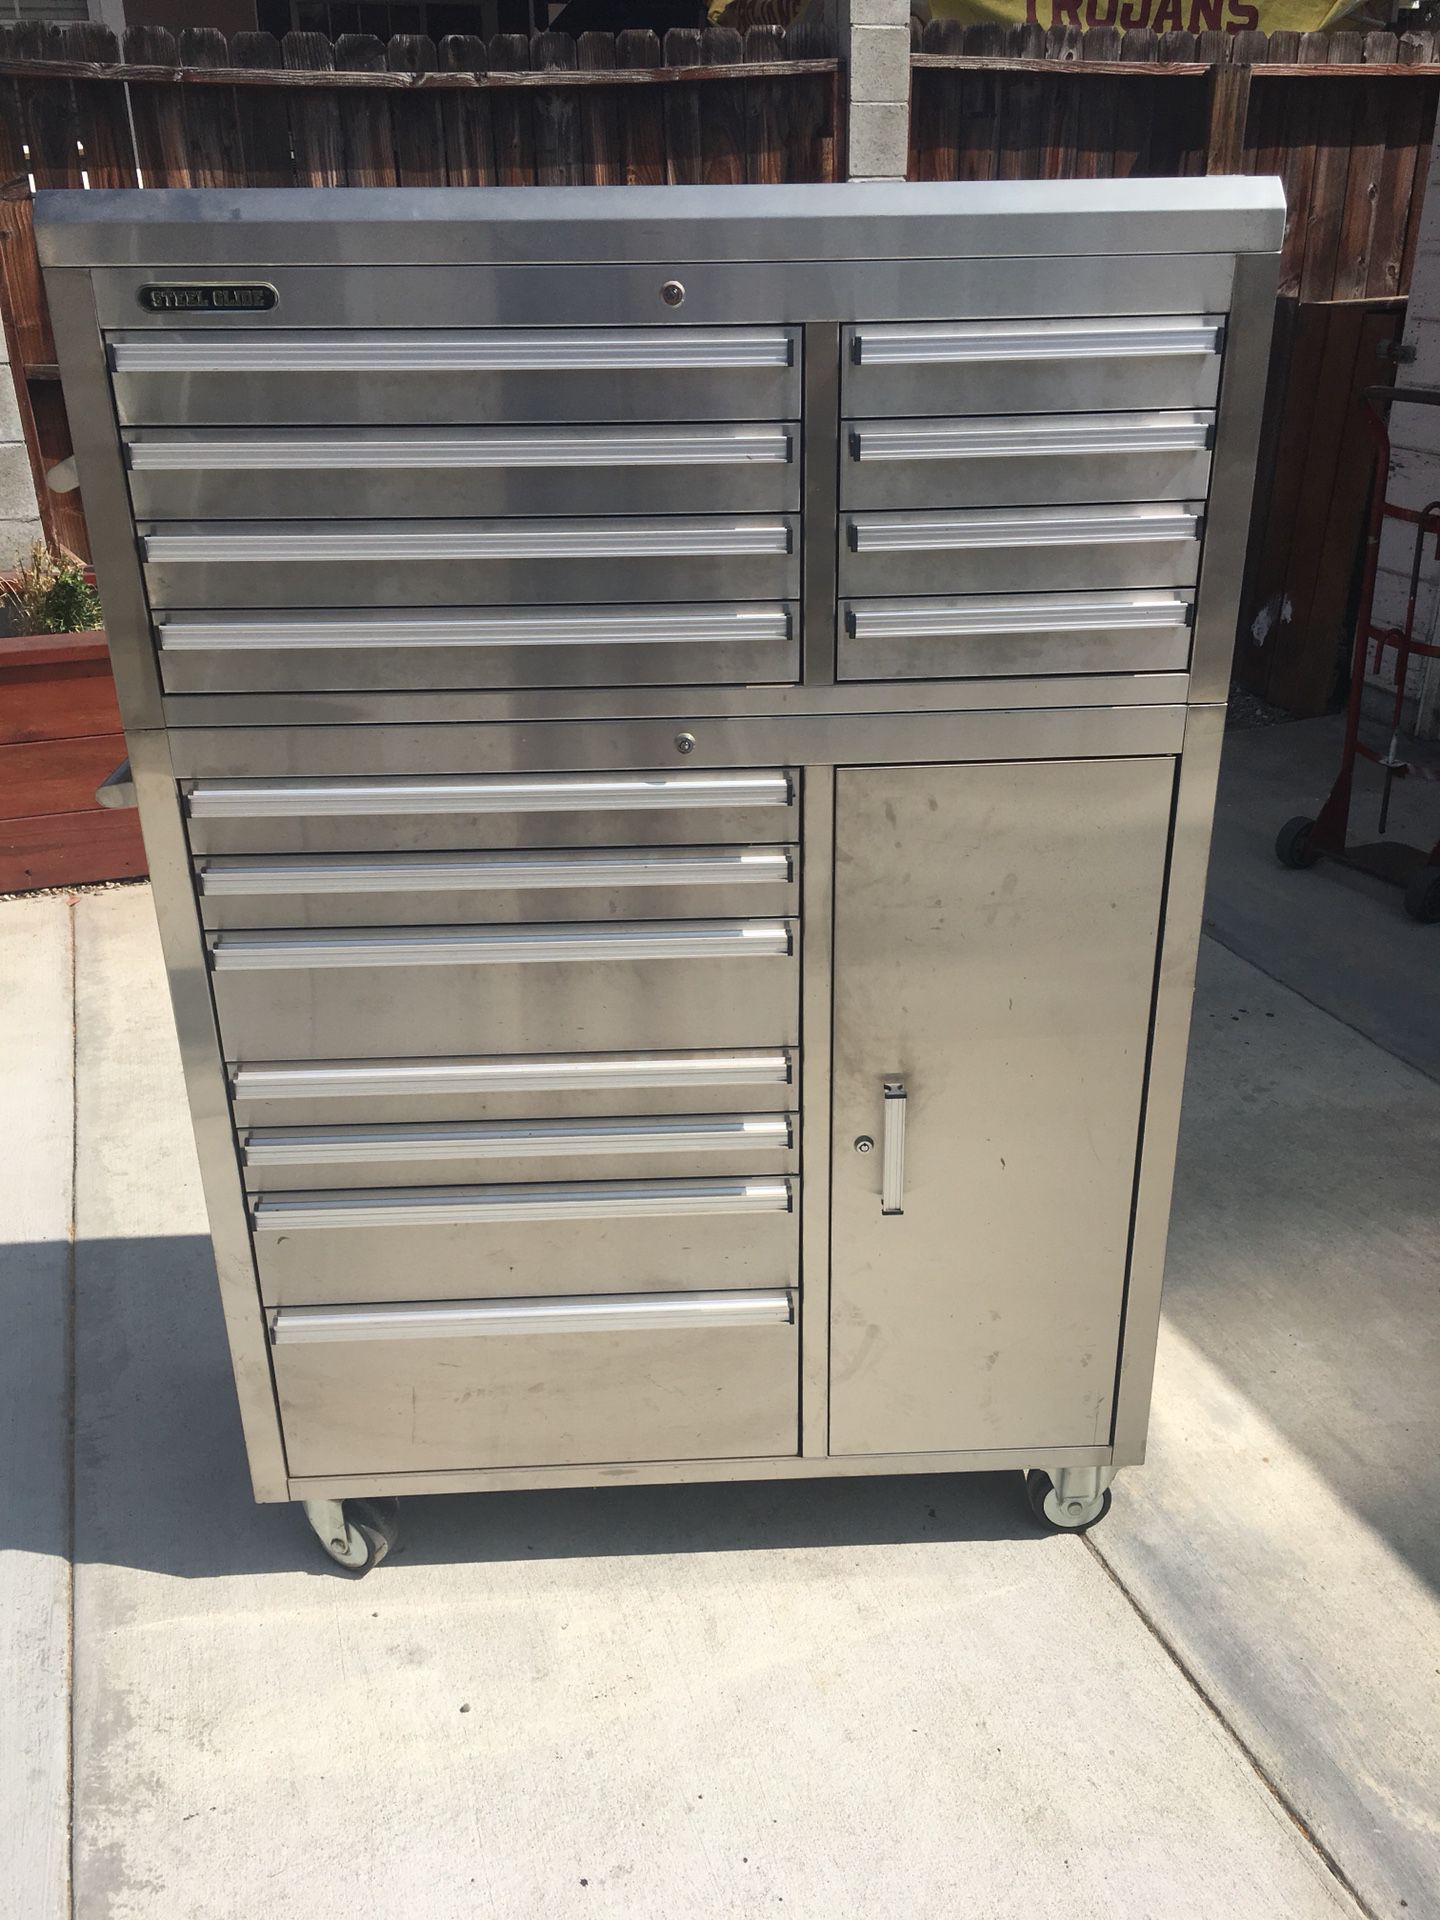 Steel Glide stainless steel rolling tool chest with ball bearing sliding drawers. Excellent condition.